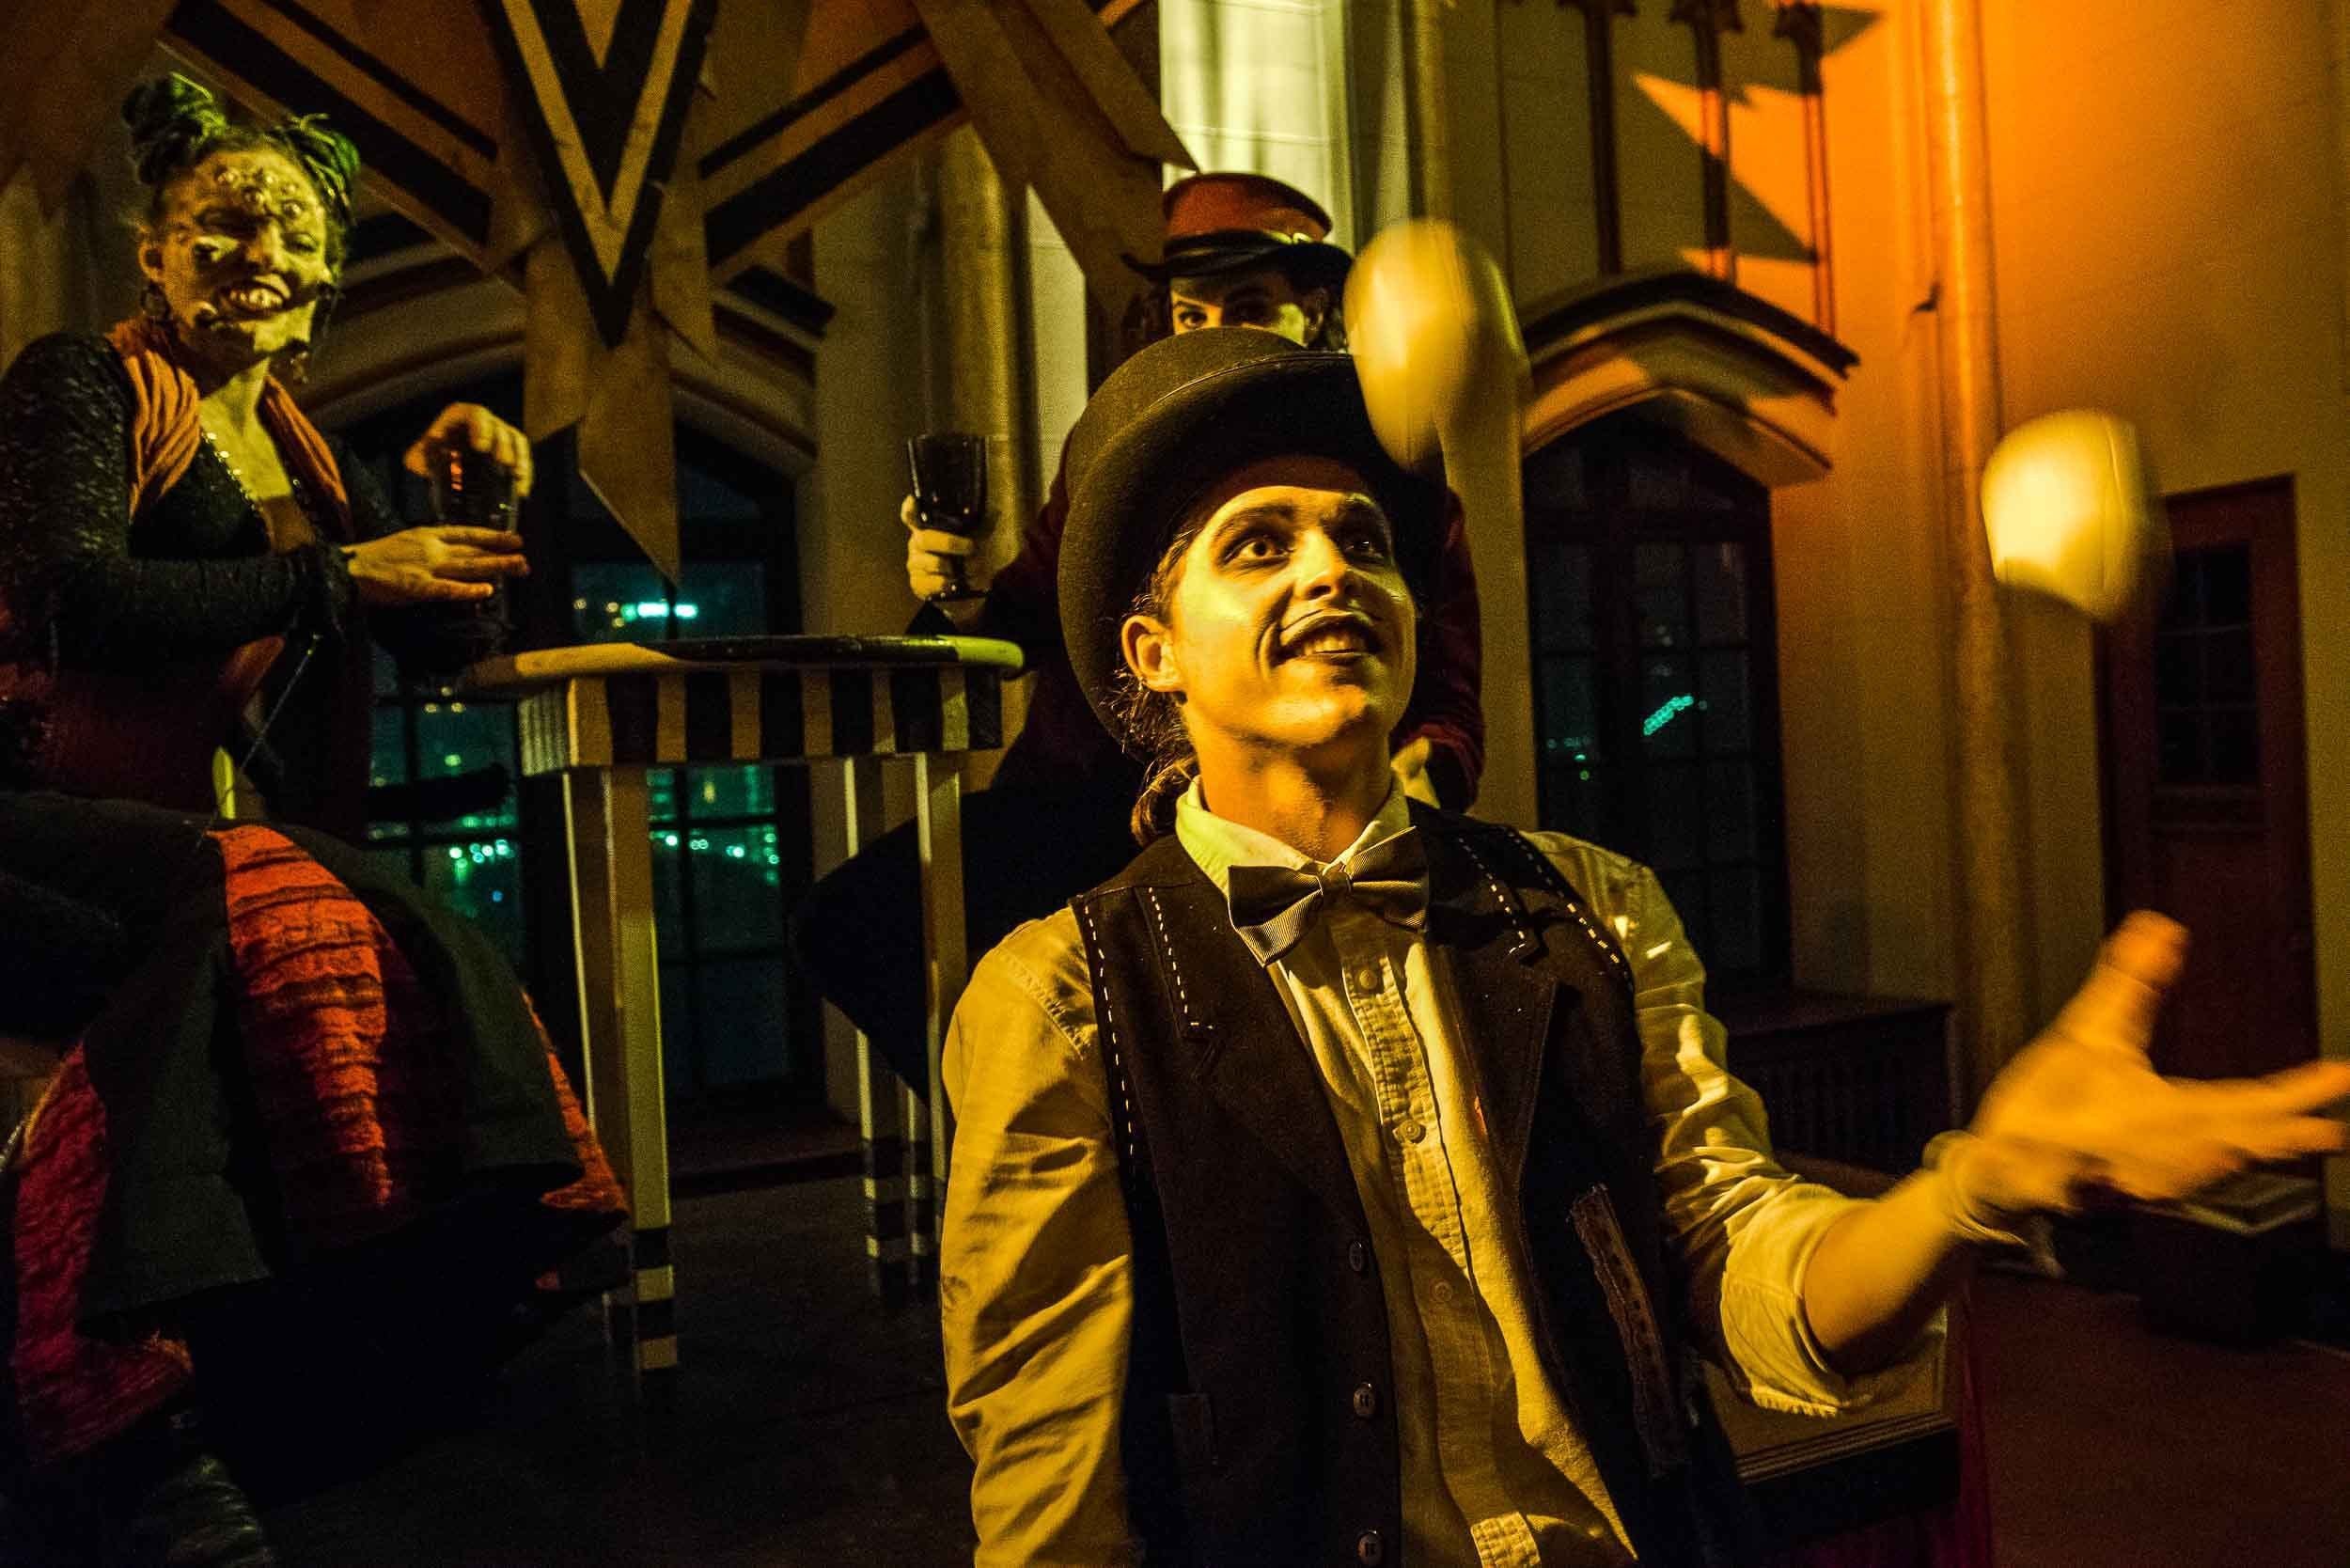 A juggler at the first weekend of the 2019 edition of Theatre Bizarre at Detroit’s Masonic Temple on Saturday, Oct. 12, 2019.